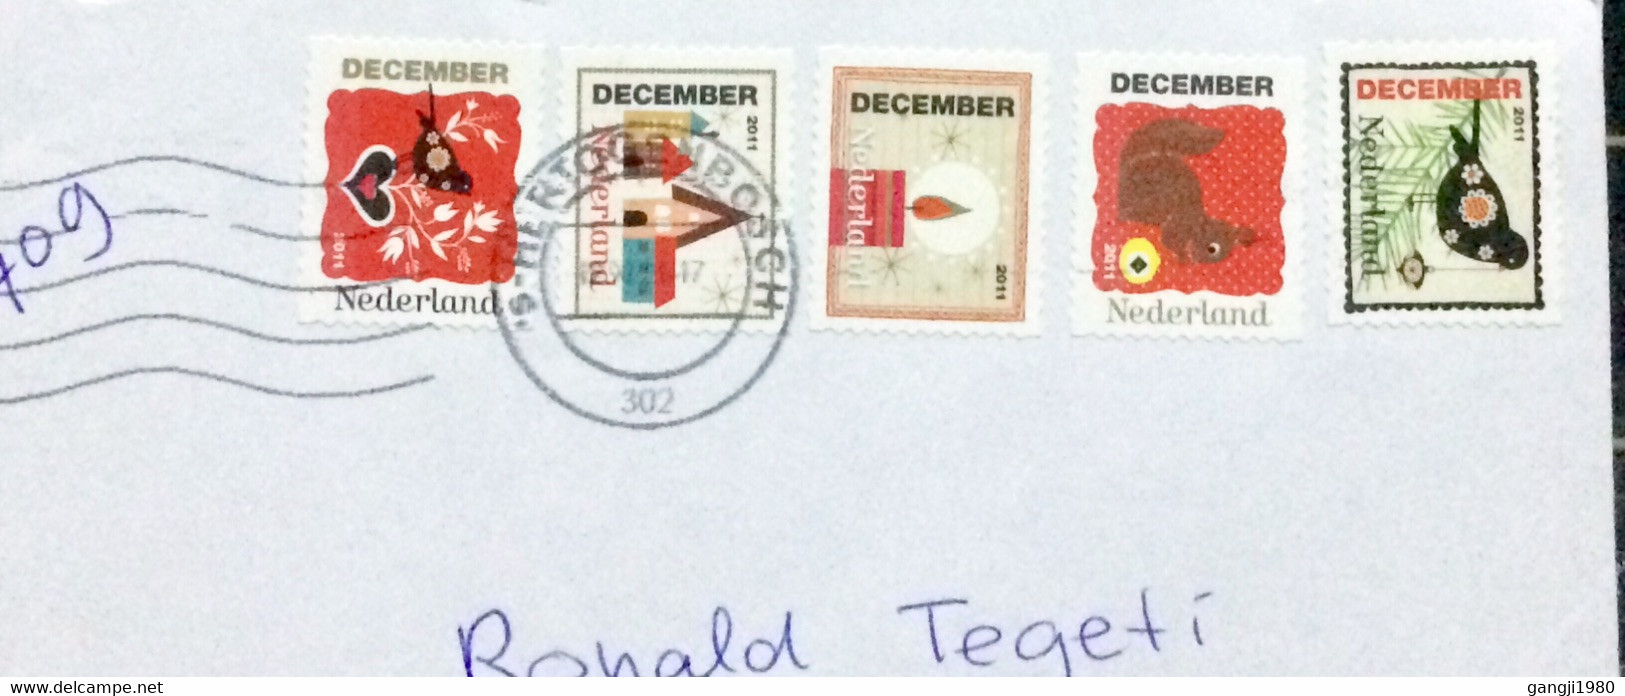 NEDERLAND 2011, COVER USED TO USA, DECEMBER 2011  DIFF  5 STAMP, BIRD, SQUIRREL, HOME, ROTTENBOSCH CITY CANCEL. - Lettres & Documents